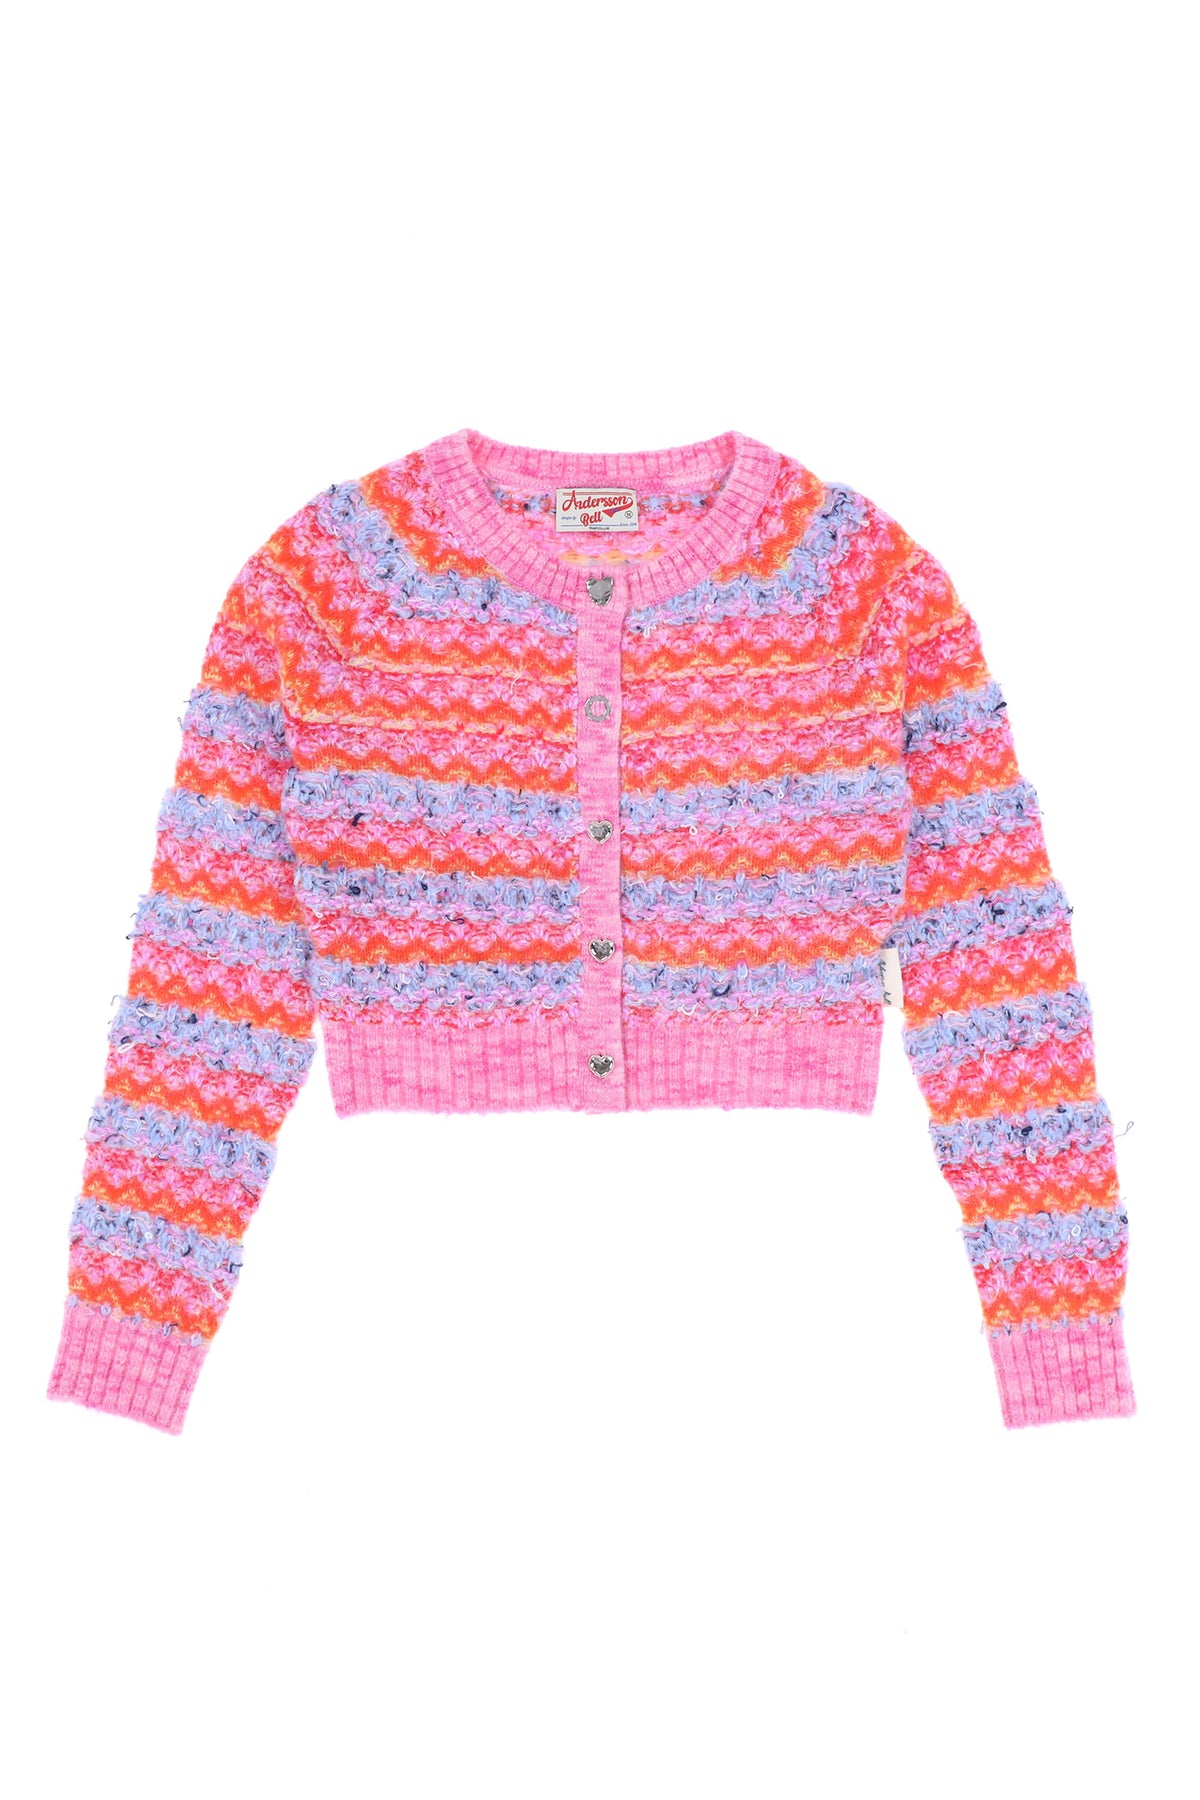 Andersson Bell STRIPE POODLE KNIT CARDIGAN / PNK